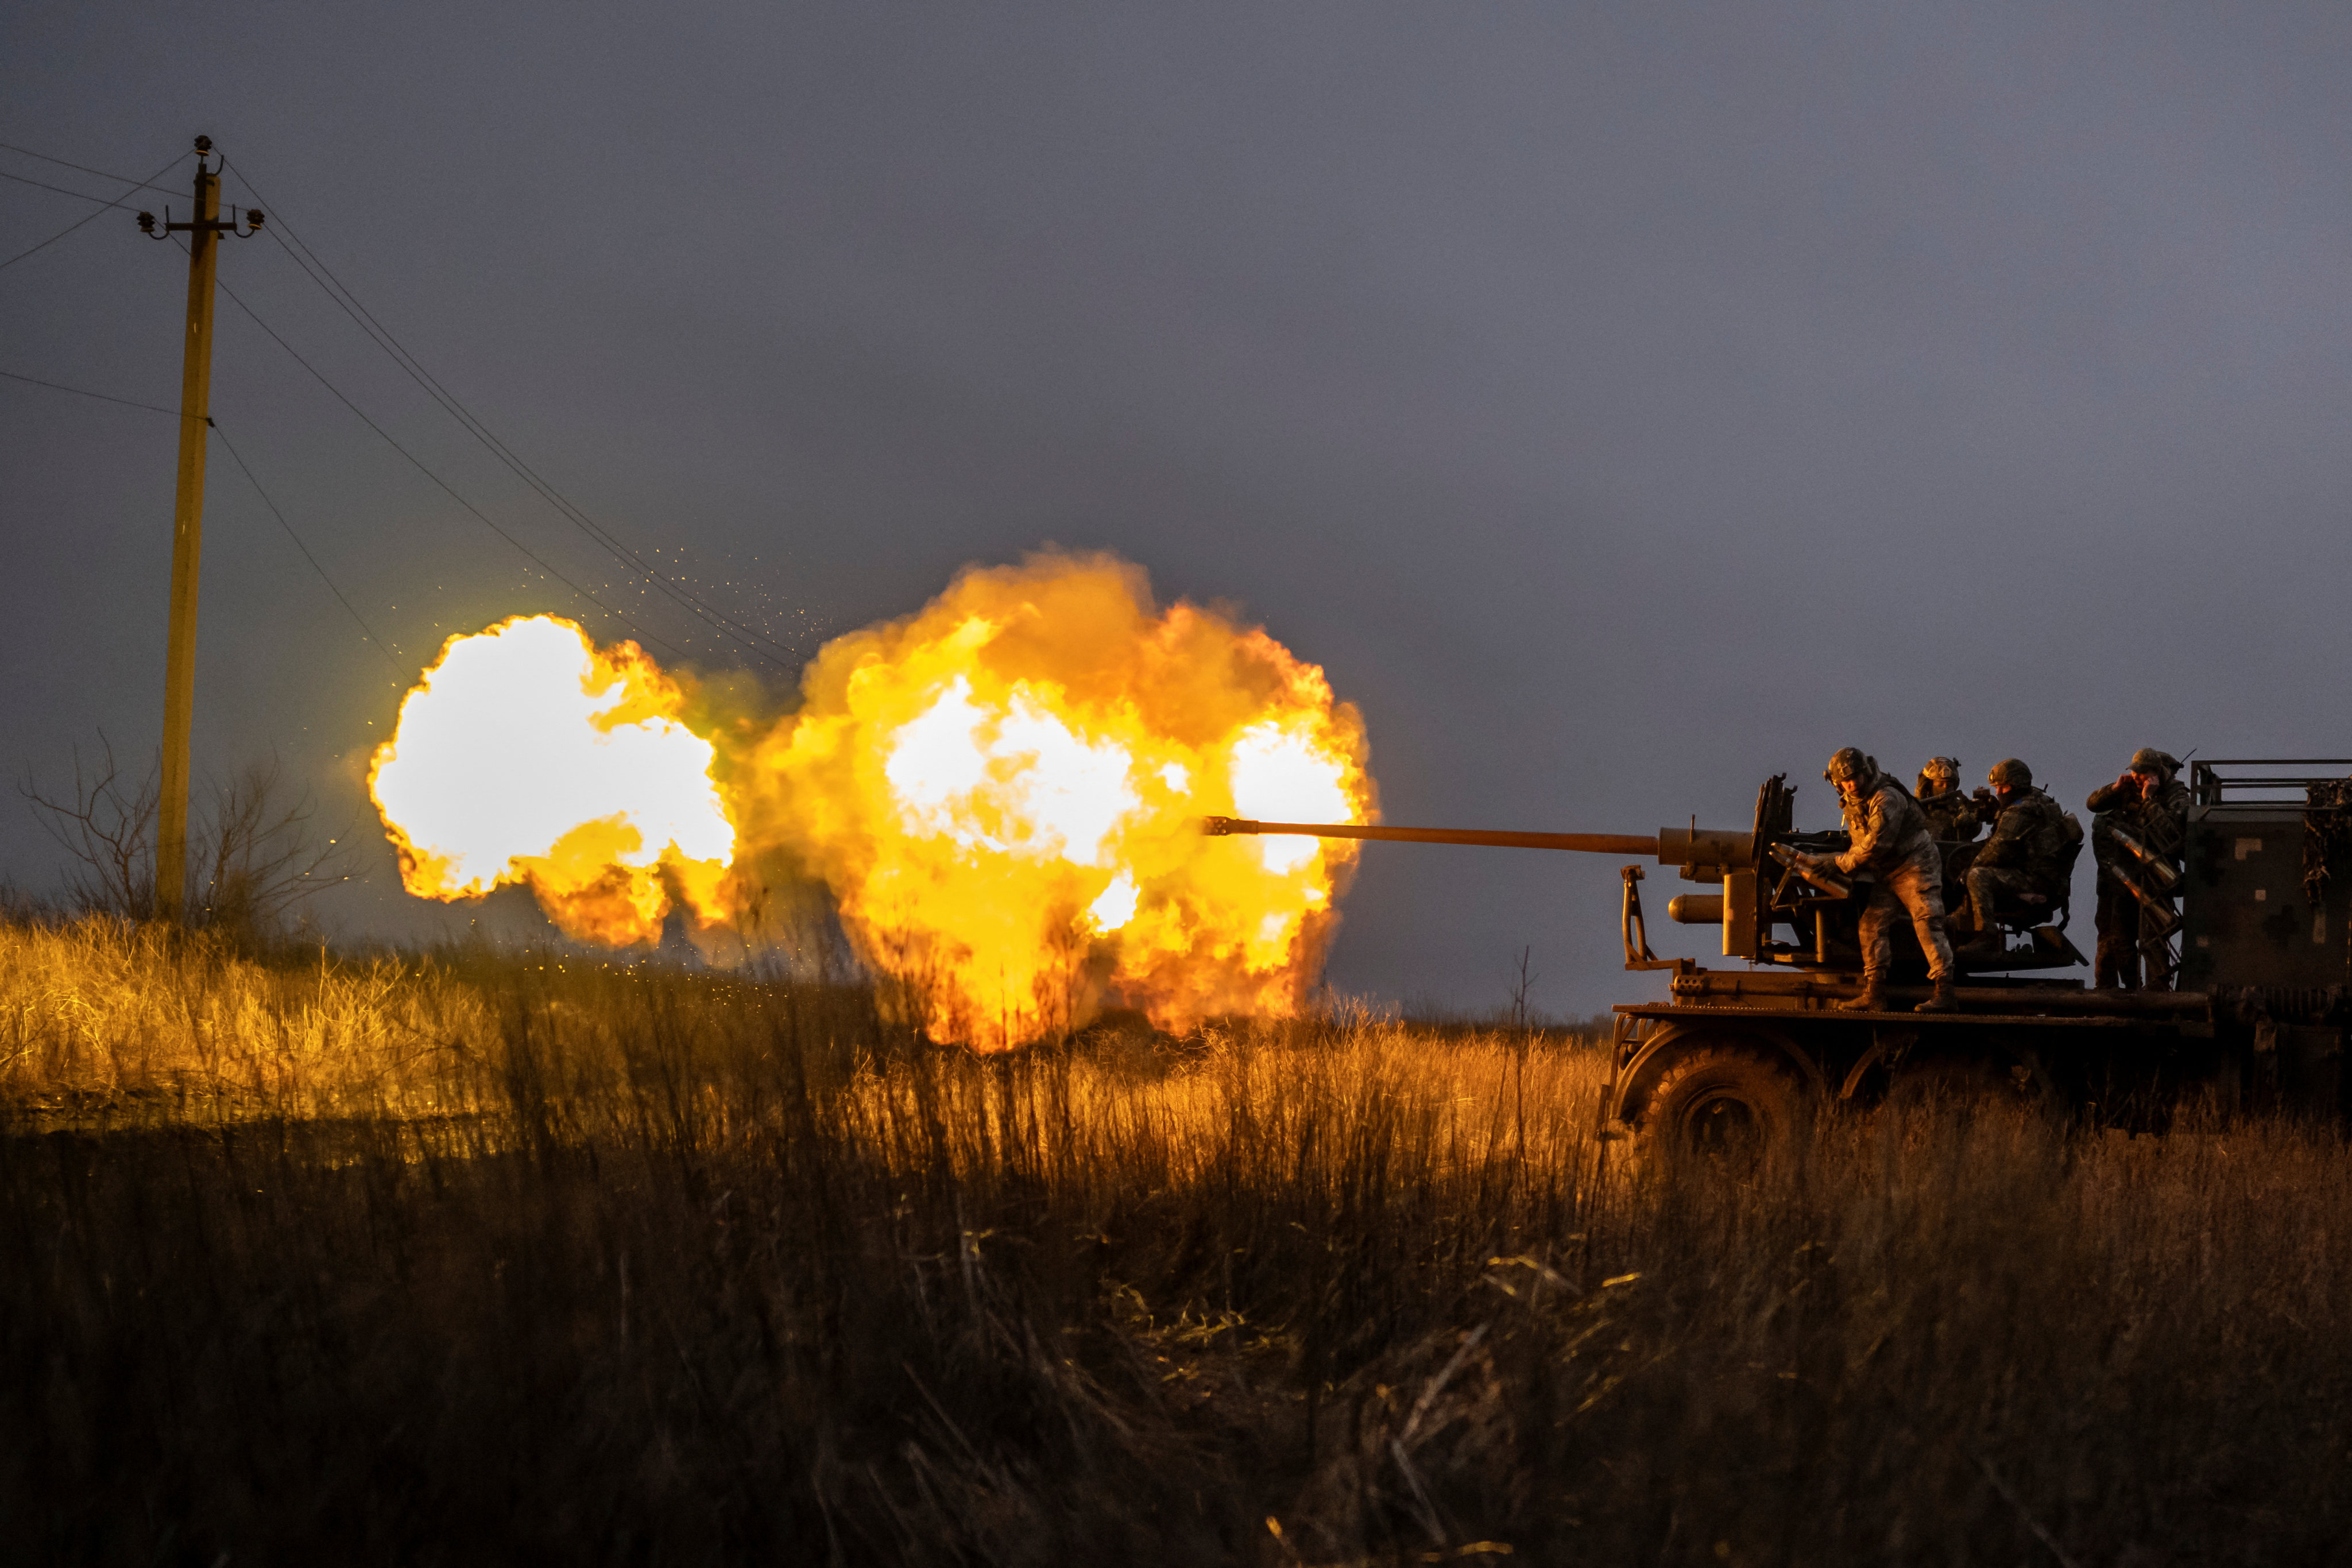 Ukrainian soldiers fire a С60 cannon towards Russian troops near the town of Bakhmut on Thursday. Photo: Reuters